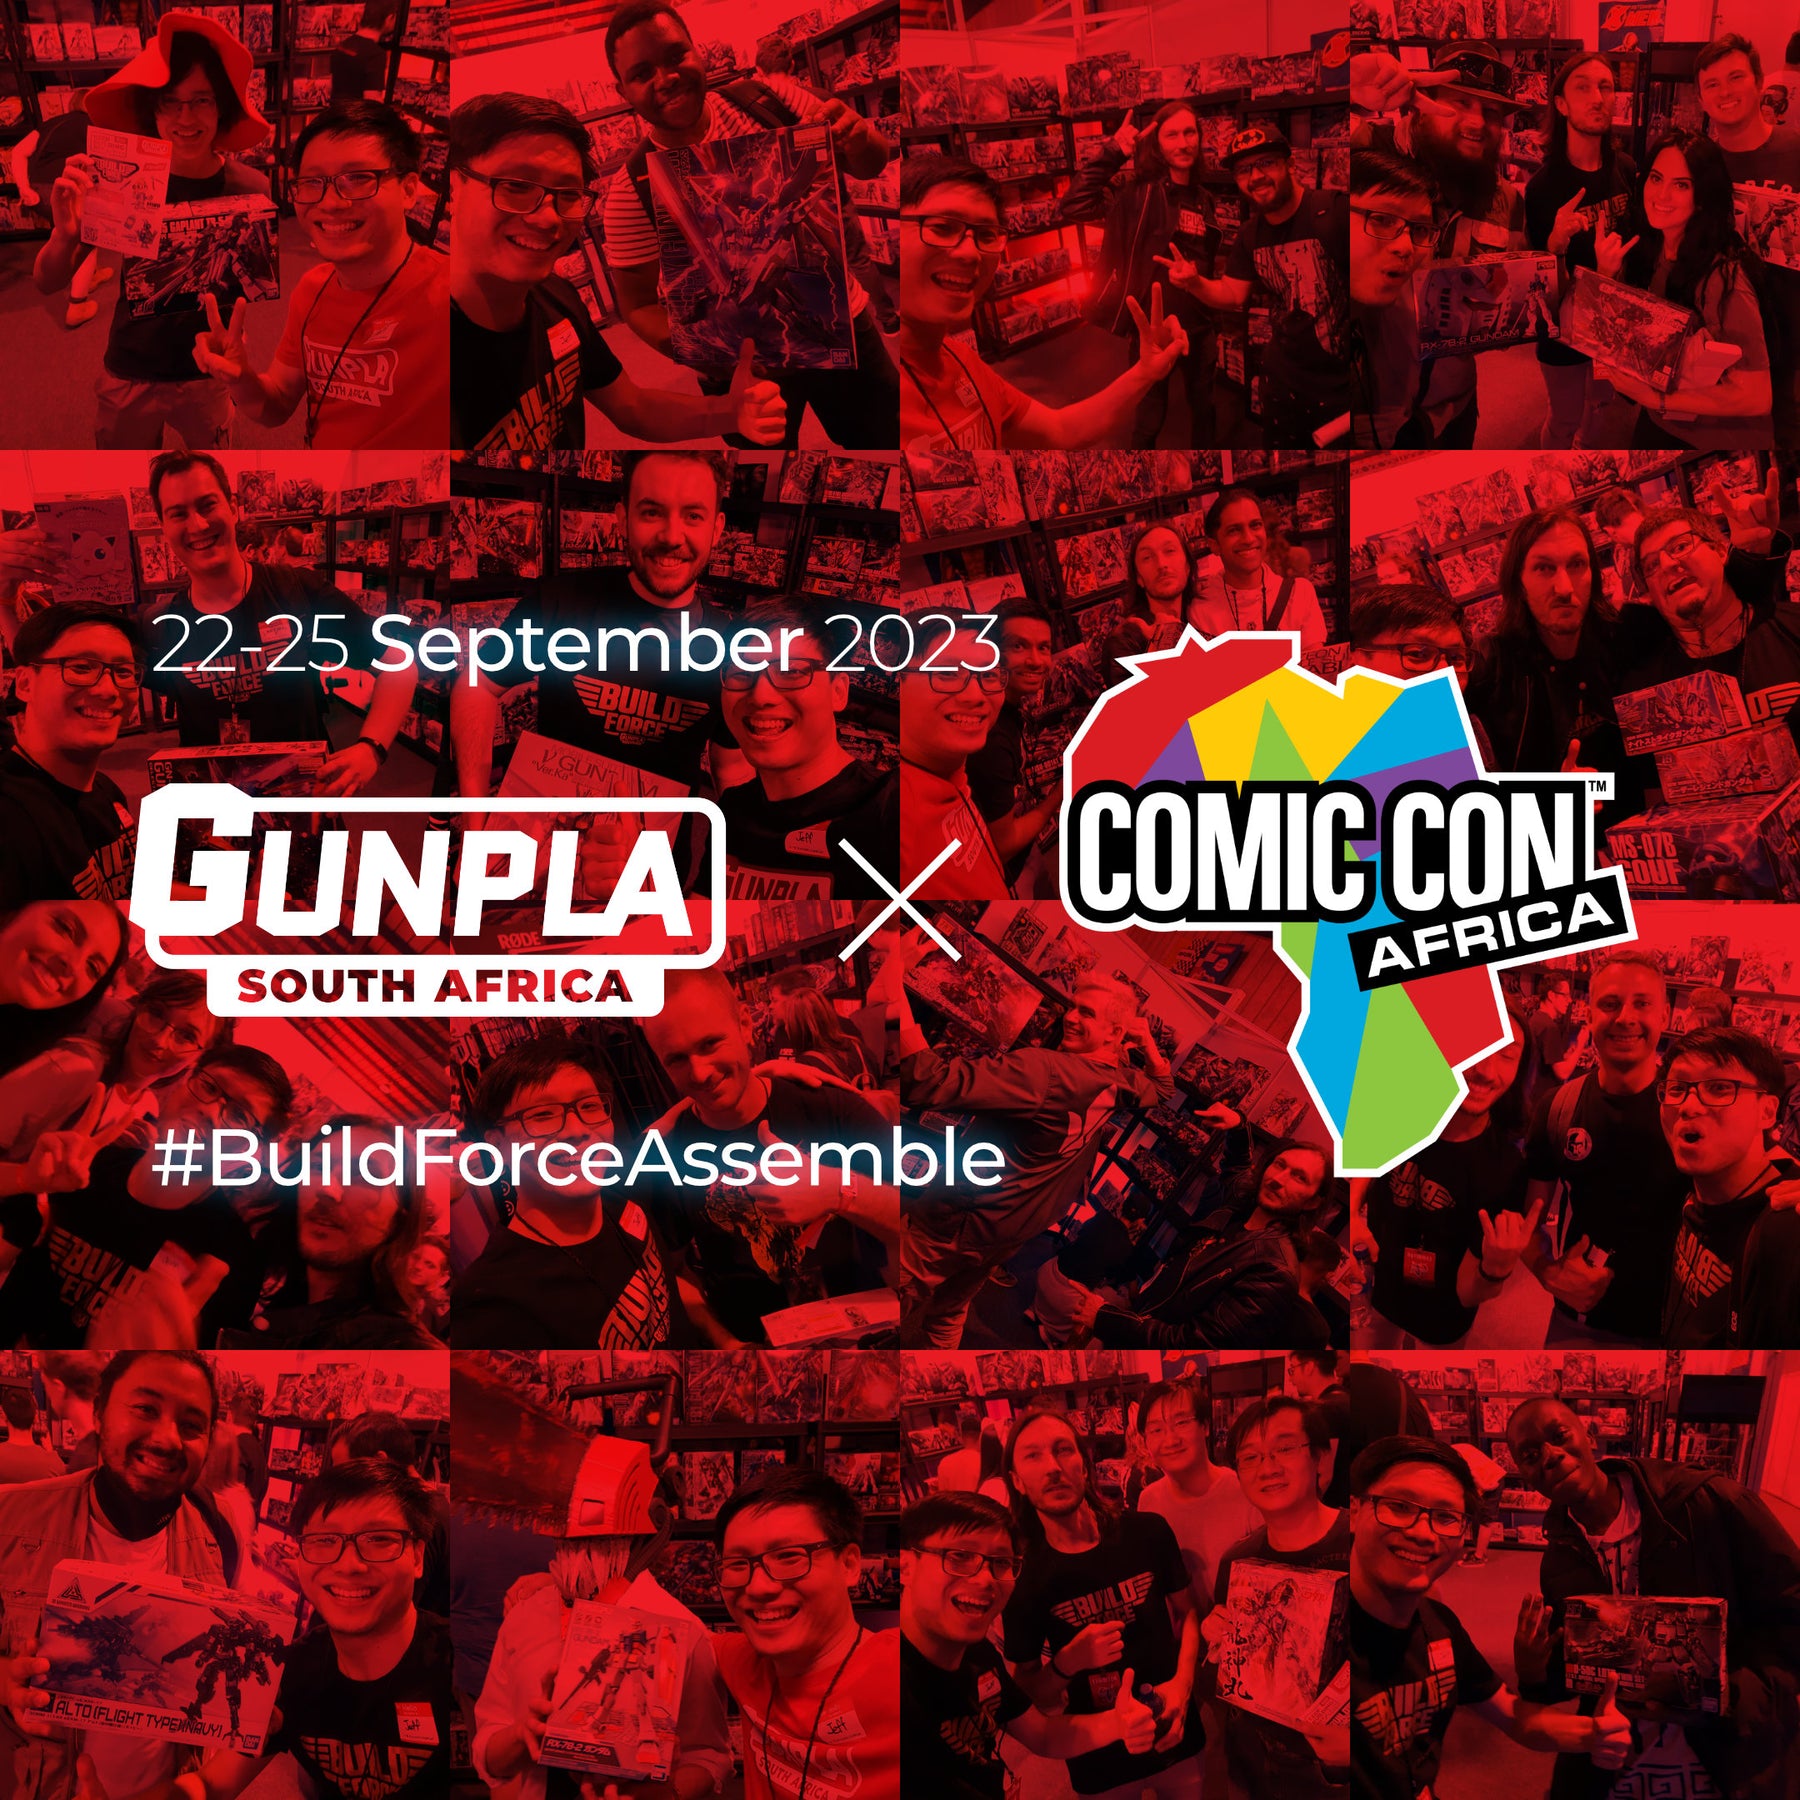 Are you going to Comic Con Africa? We sure are!